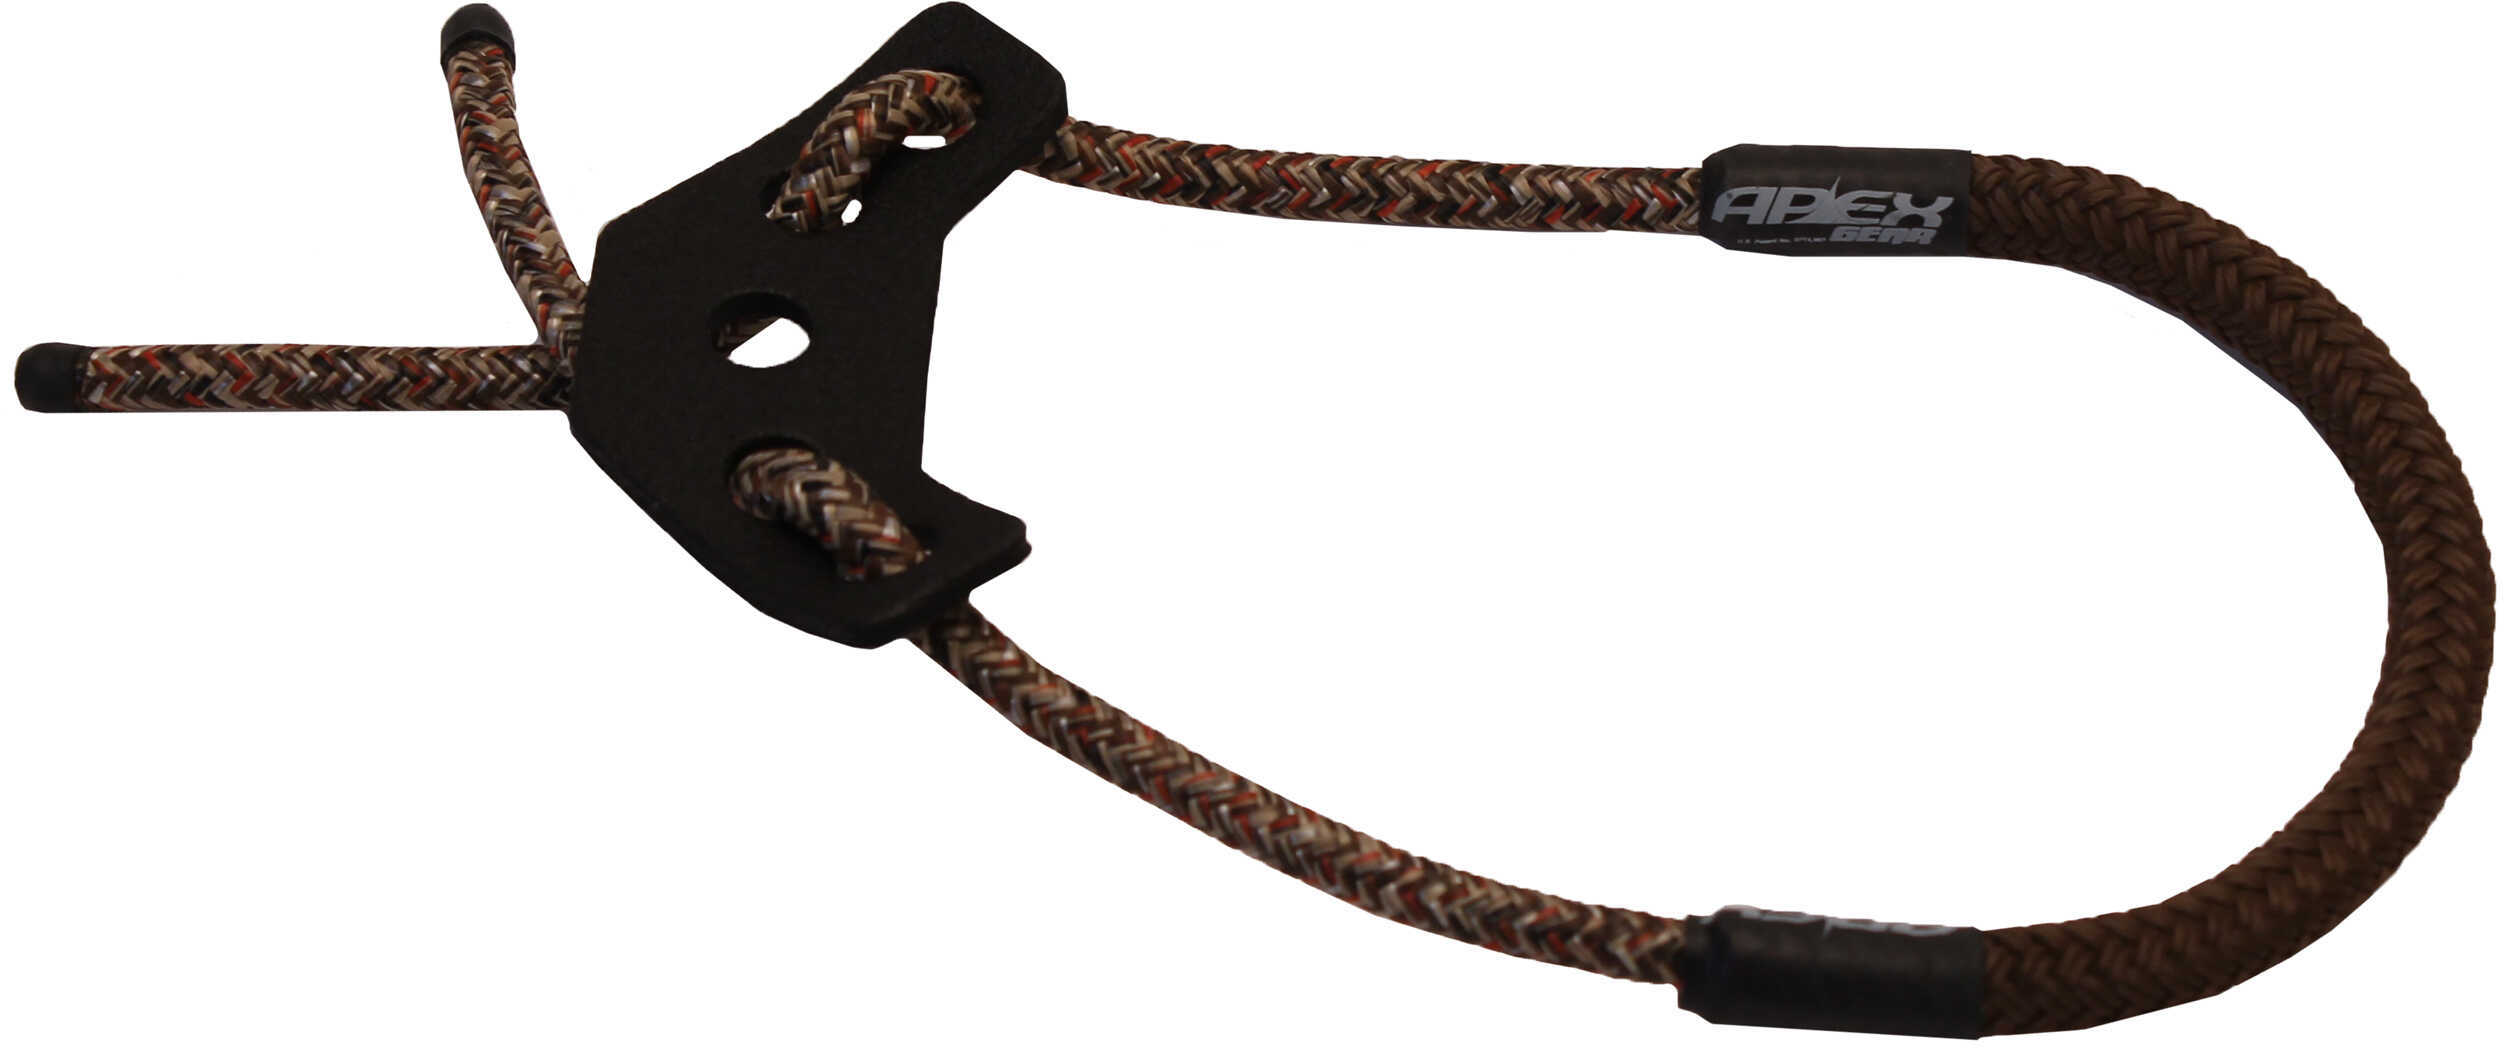 Truglo Apex Attitude Sling Canmo/Brown Md: AG441CW